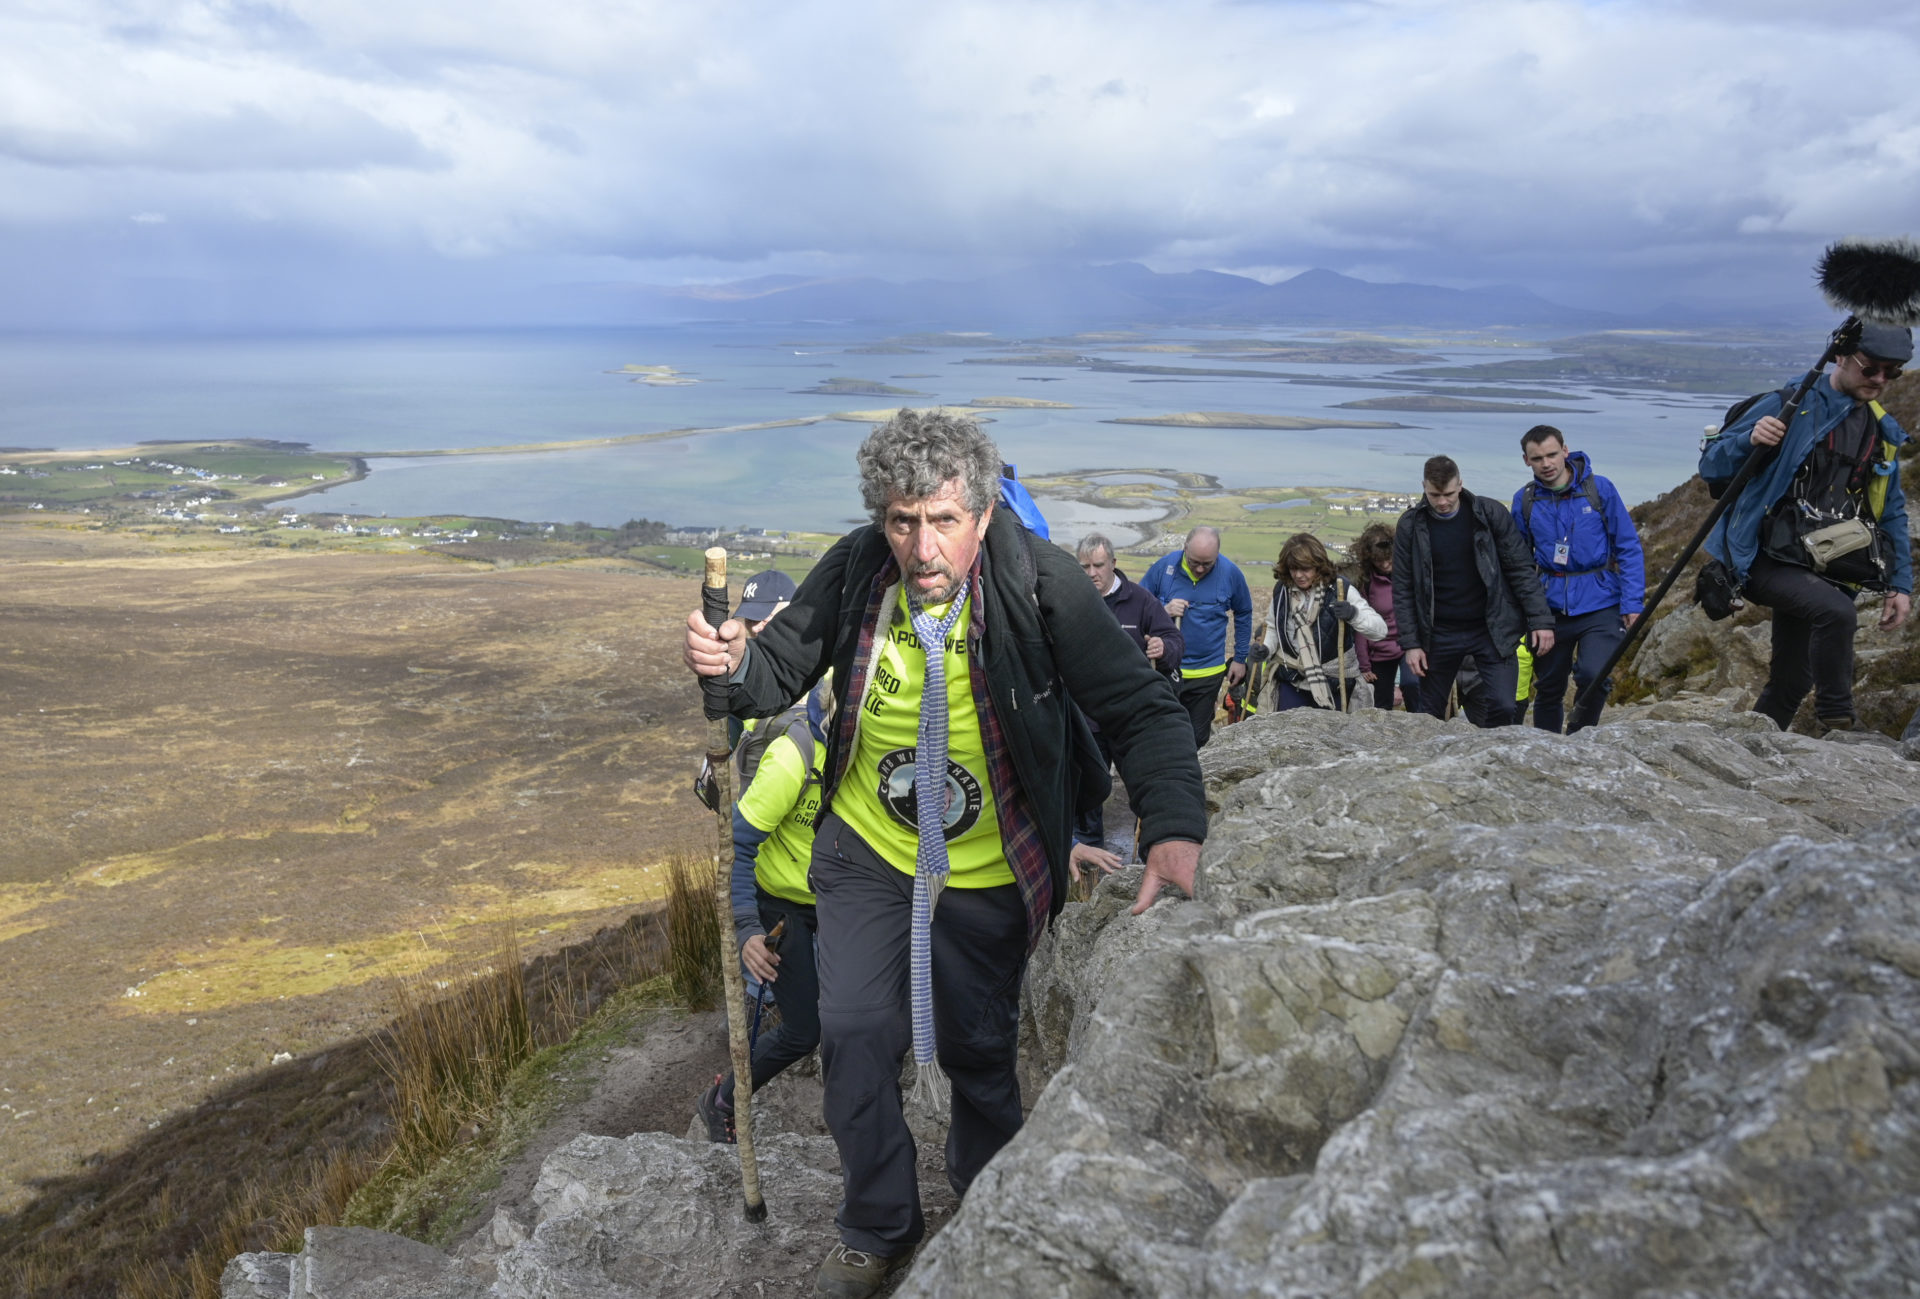 Climb with Charlie sees Charlie Bird climbing Croagh Patrick in Co Mayo to raise funds for two Irish charities